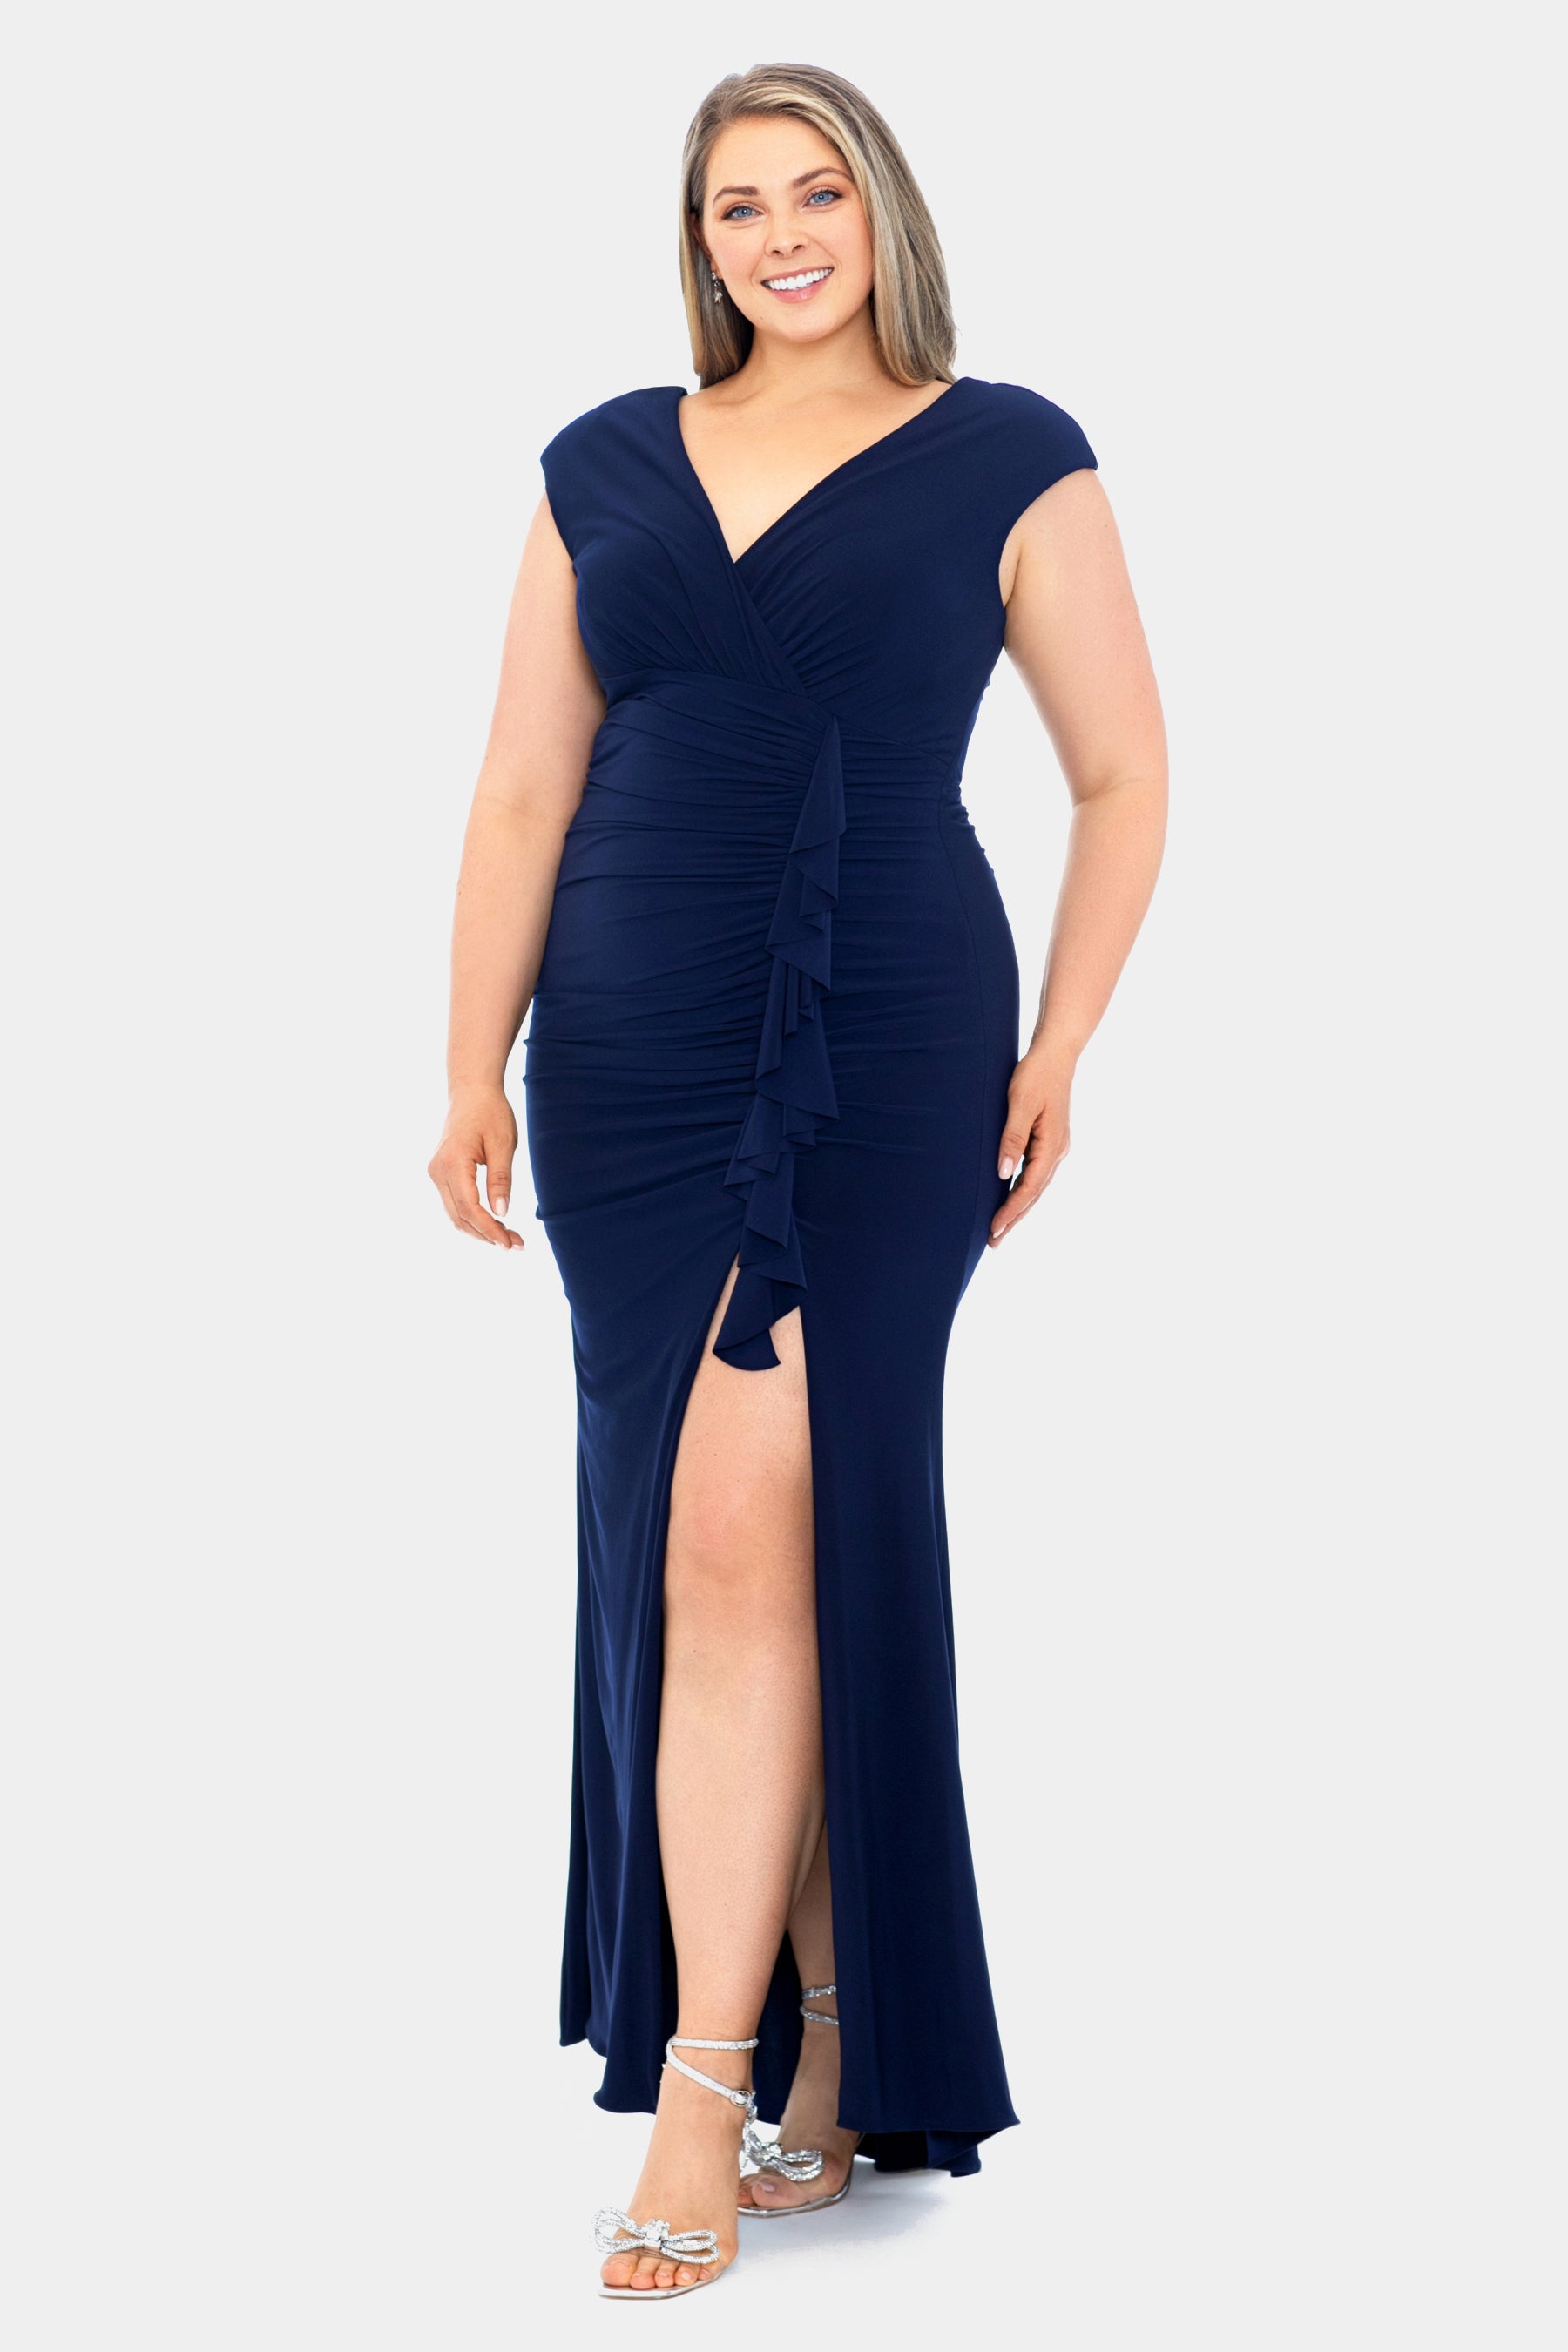 Nina Parker, Macy's Plus-Size Fashion Collection: What to Know